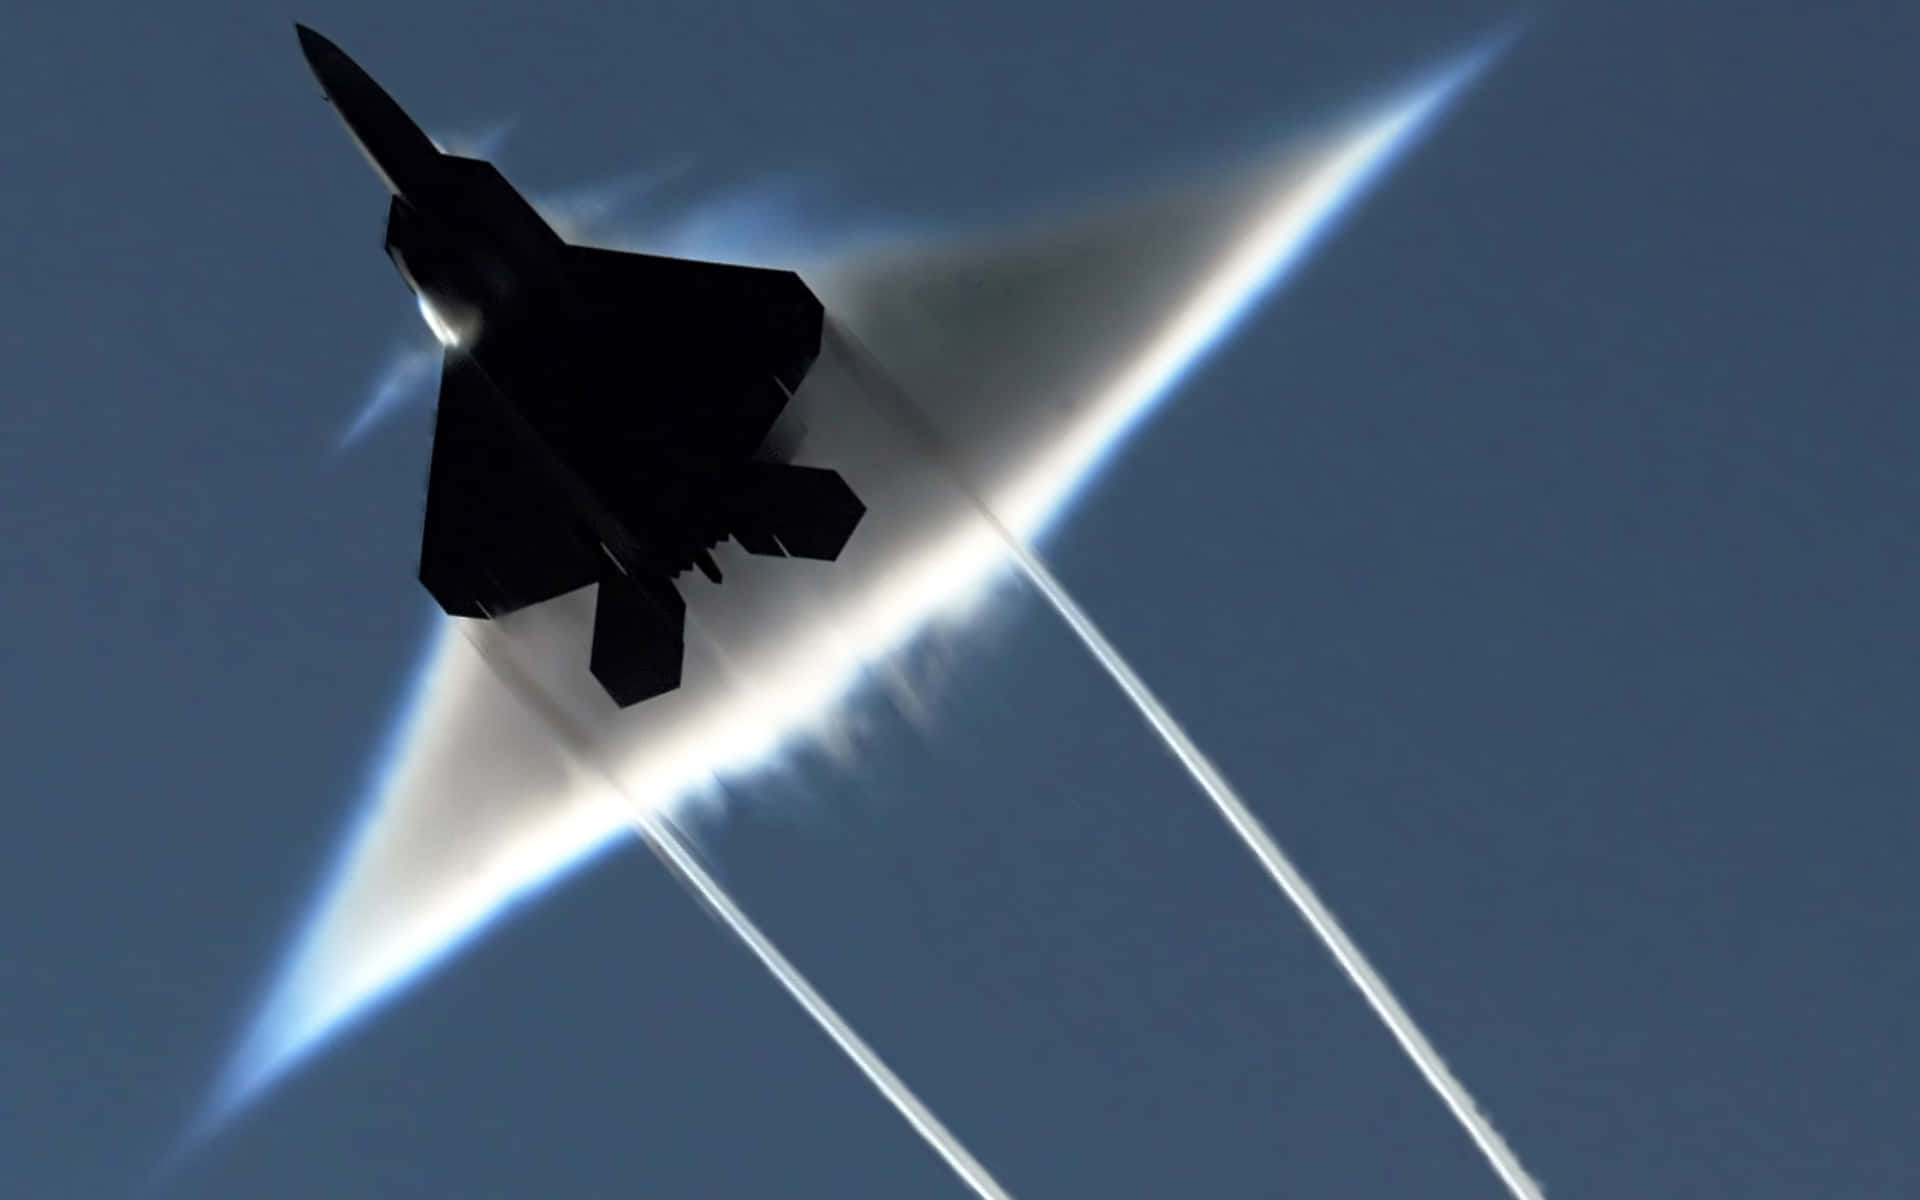 A U.S. Air Force F-22 Raptor performs aerial acrobatics during an airshow Wallpaper